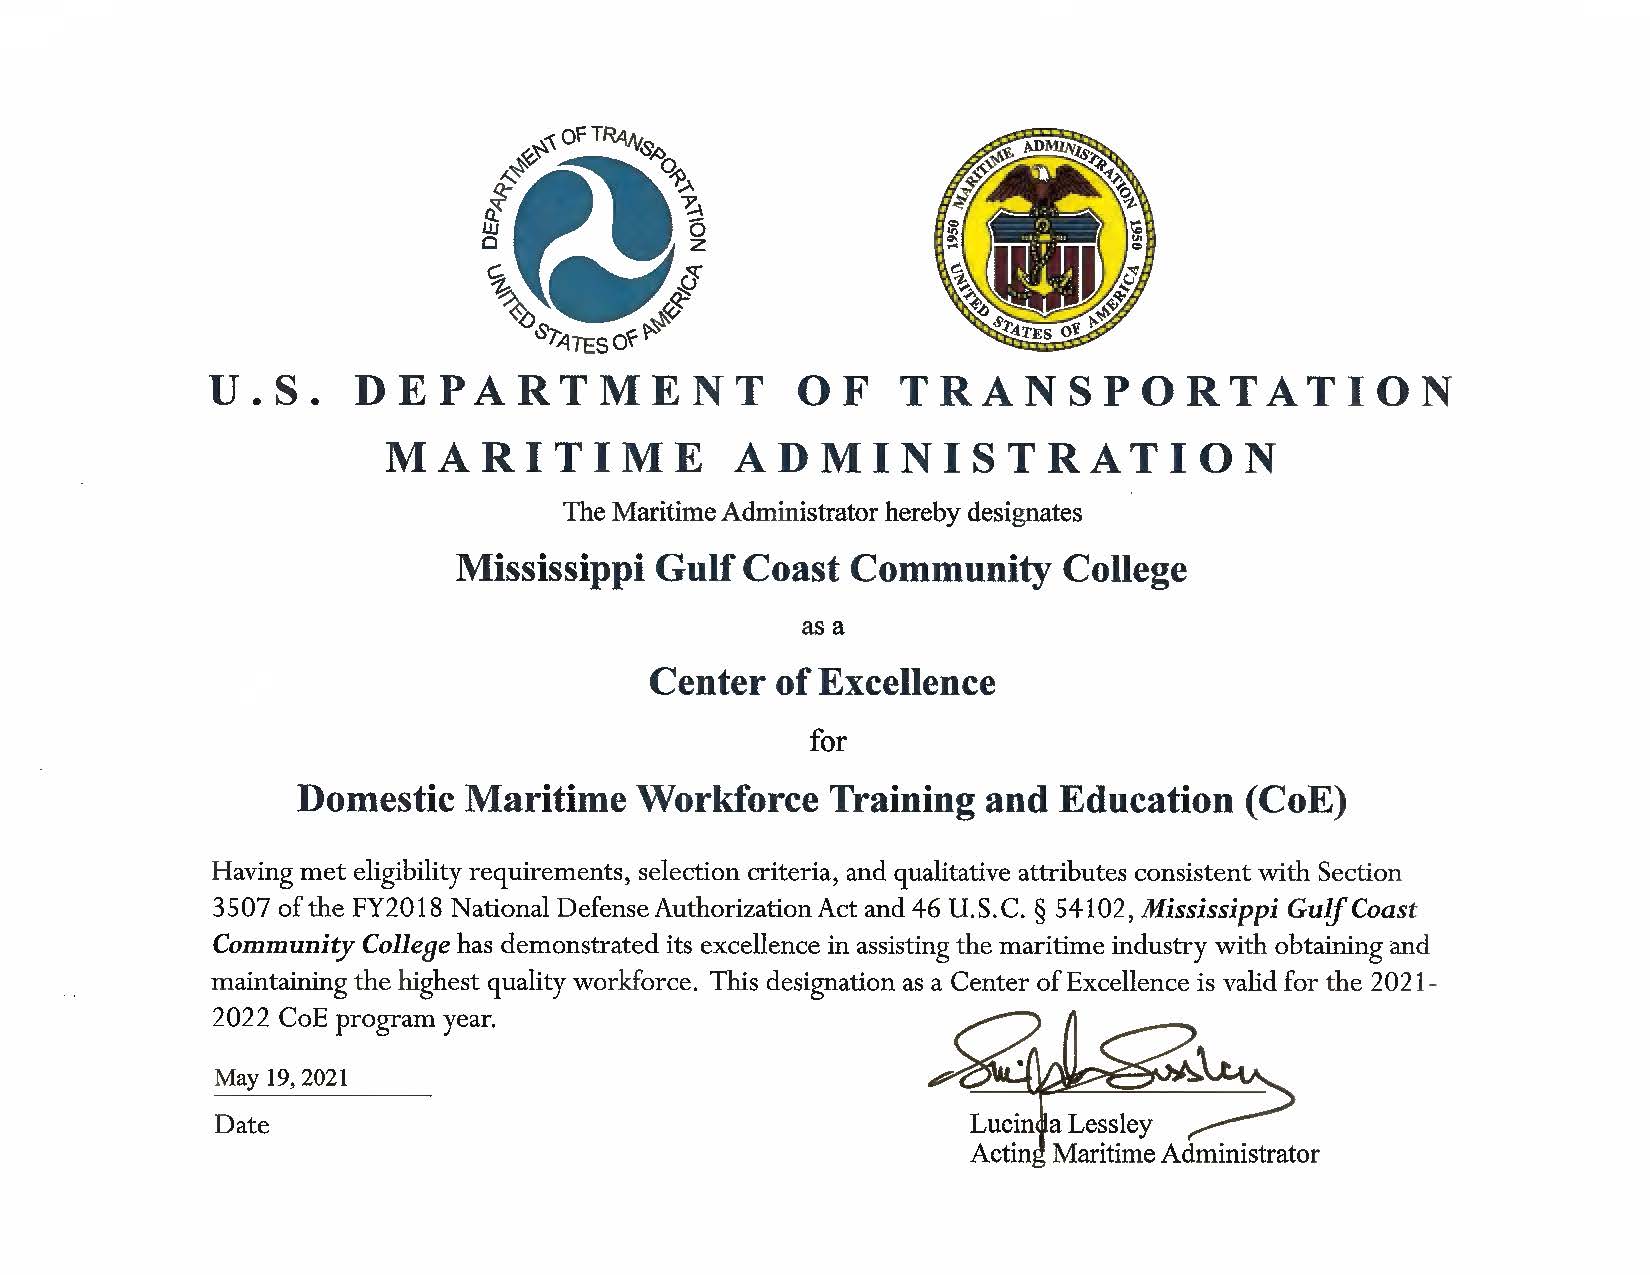 MGCCC named a 2021 Center of Excellence for Domestic Maritime Workforce Training and Education